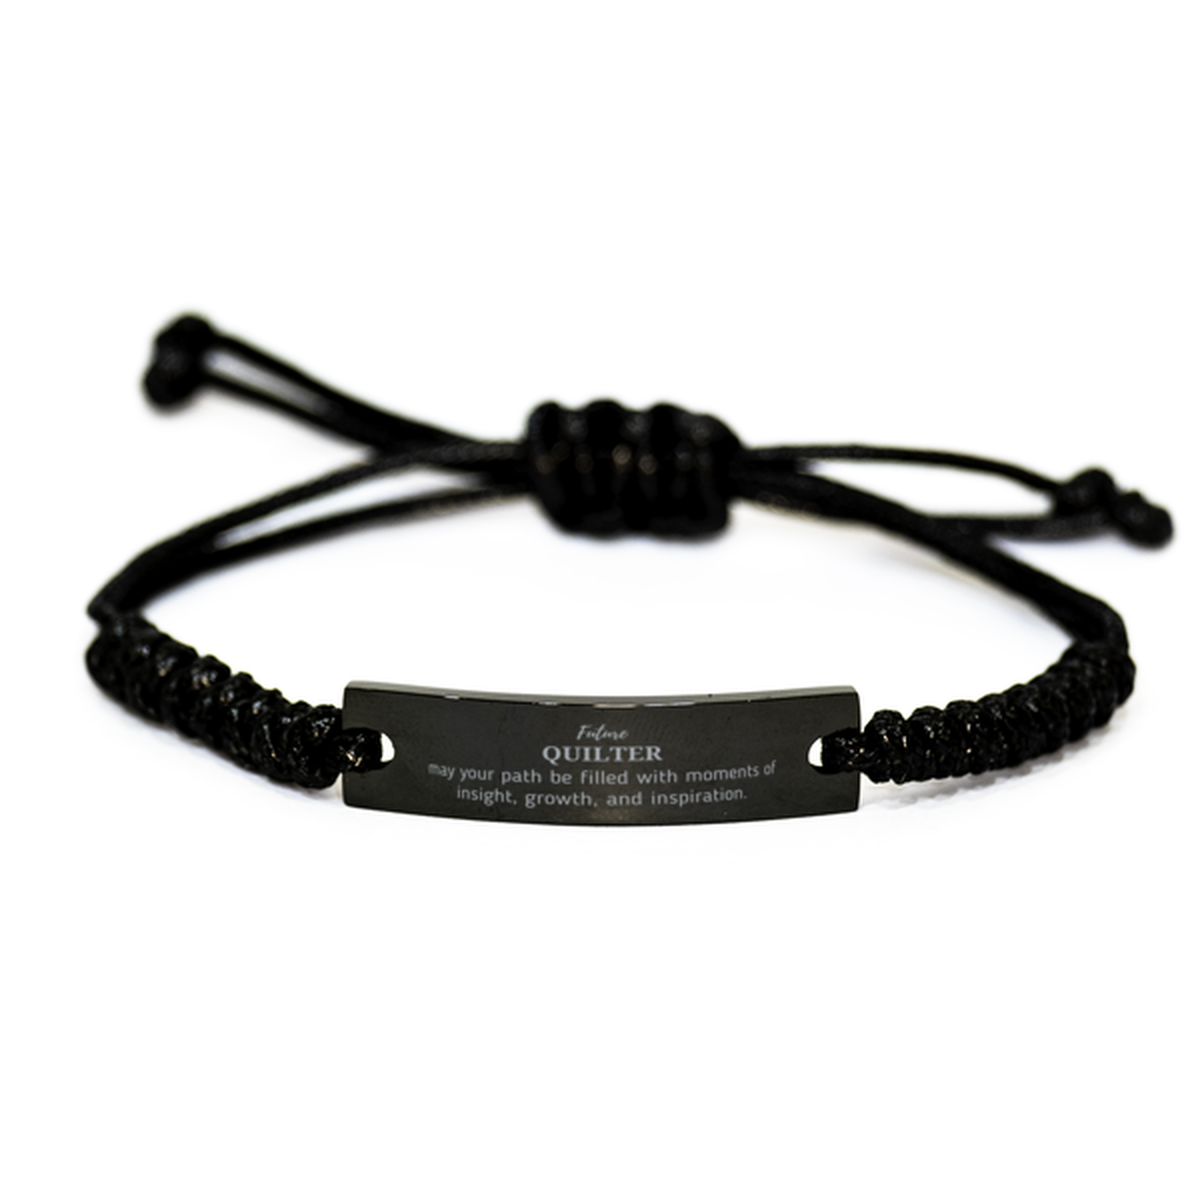 Future Quilter Gifts, May your path be filled with moments of insight, Graduation Gifts for New Quilter, Christmas Unique Black Rope Bracelet For Men, Women, Friends